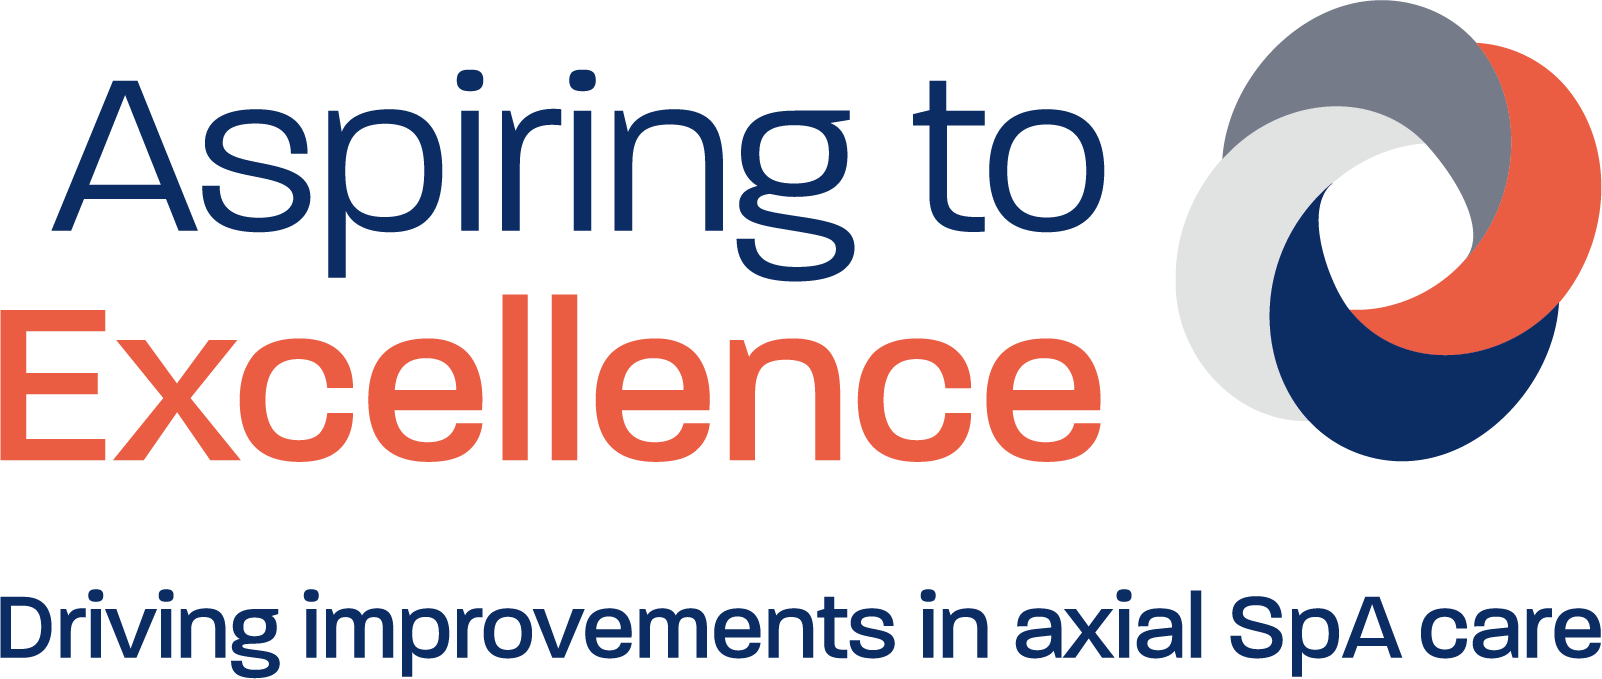 The words Aspiring to Excellence, driving improvement in axial SpA care plus circular logo